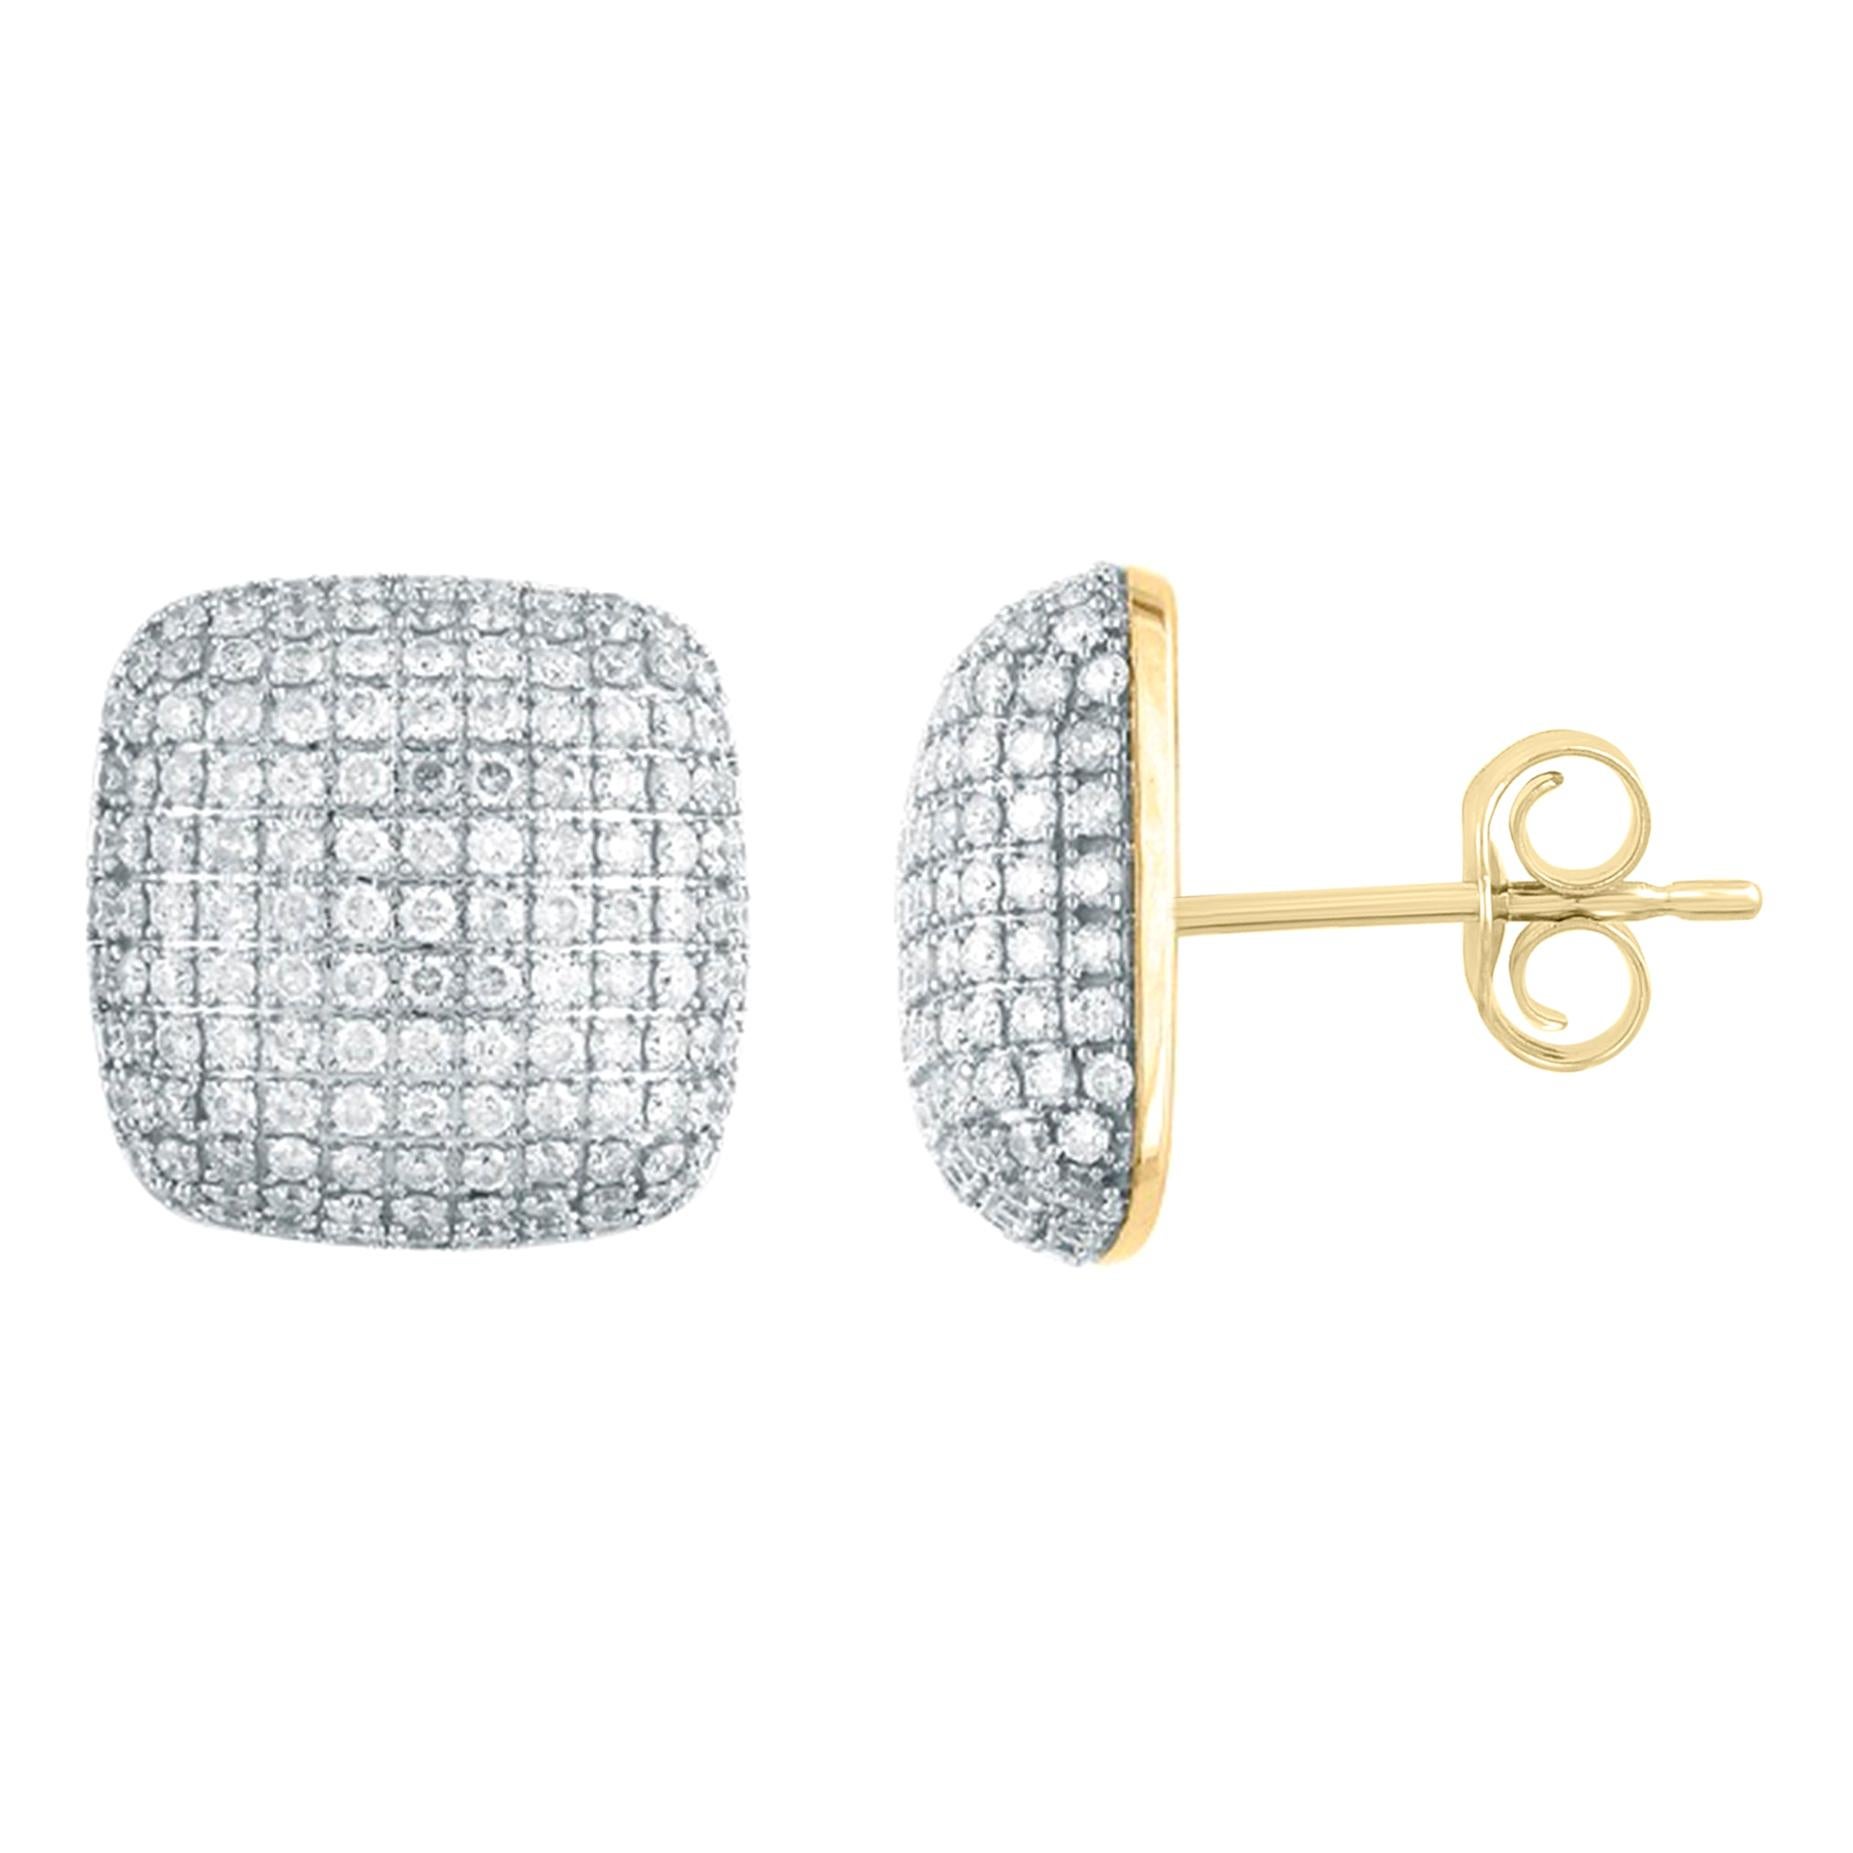 TJD 2.00 Carat Round Diamond 18K Yellow Gold Square Dome Cluster Stud Earrings For Sale